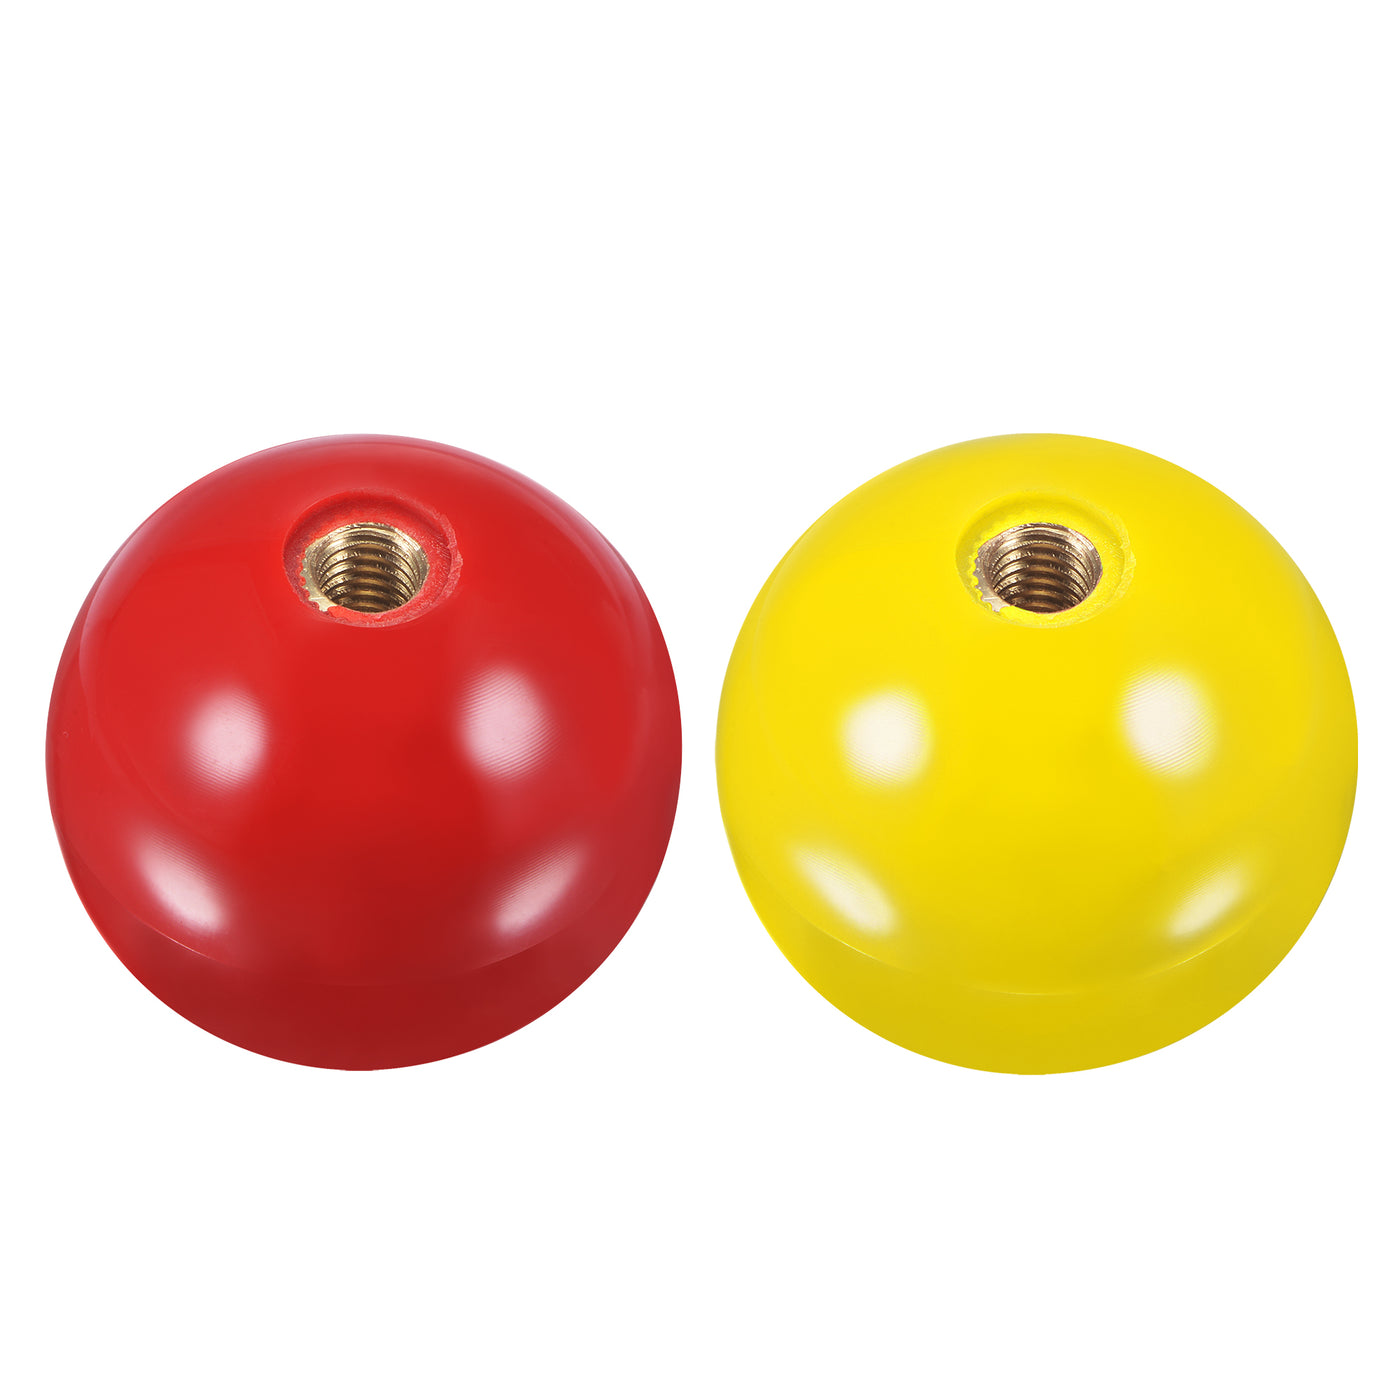 uxcell Uxcell Joystick Head Rocker Ball Top Handle Arcade Game Replacement Red/Yellow